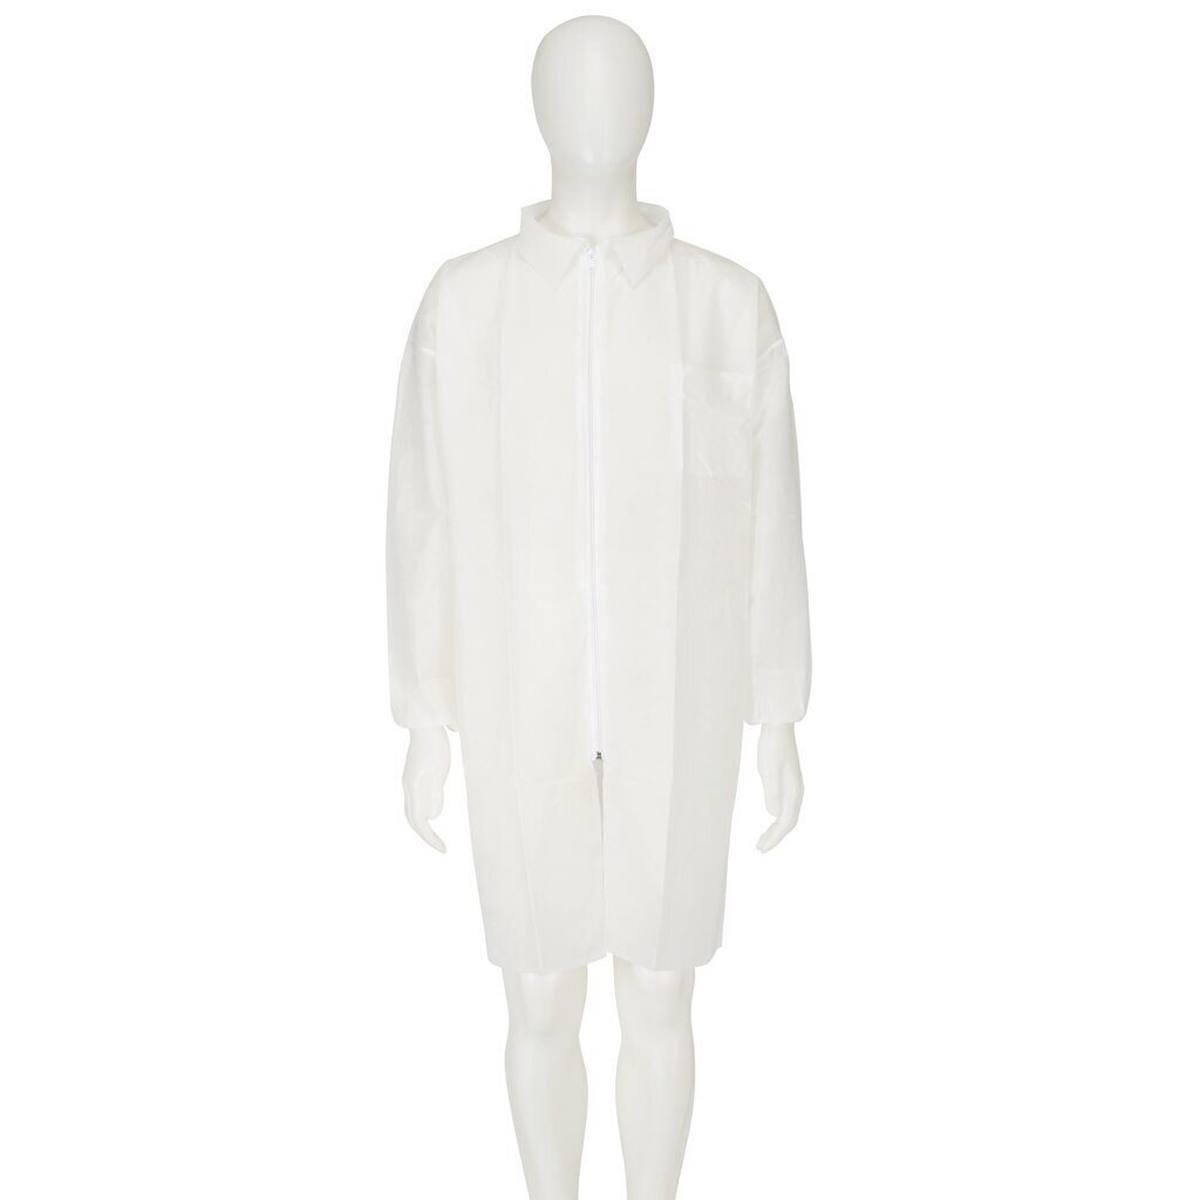 3M 4400 Coat, white, size M, material 100% polypropylene, breathable, very light, with zip fastener